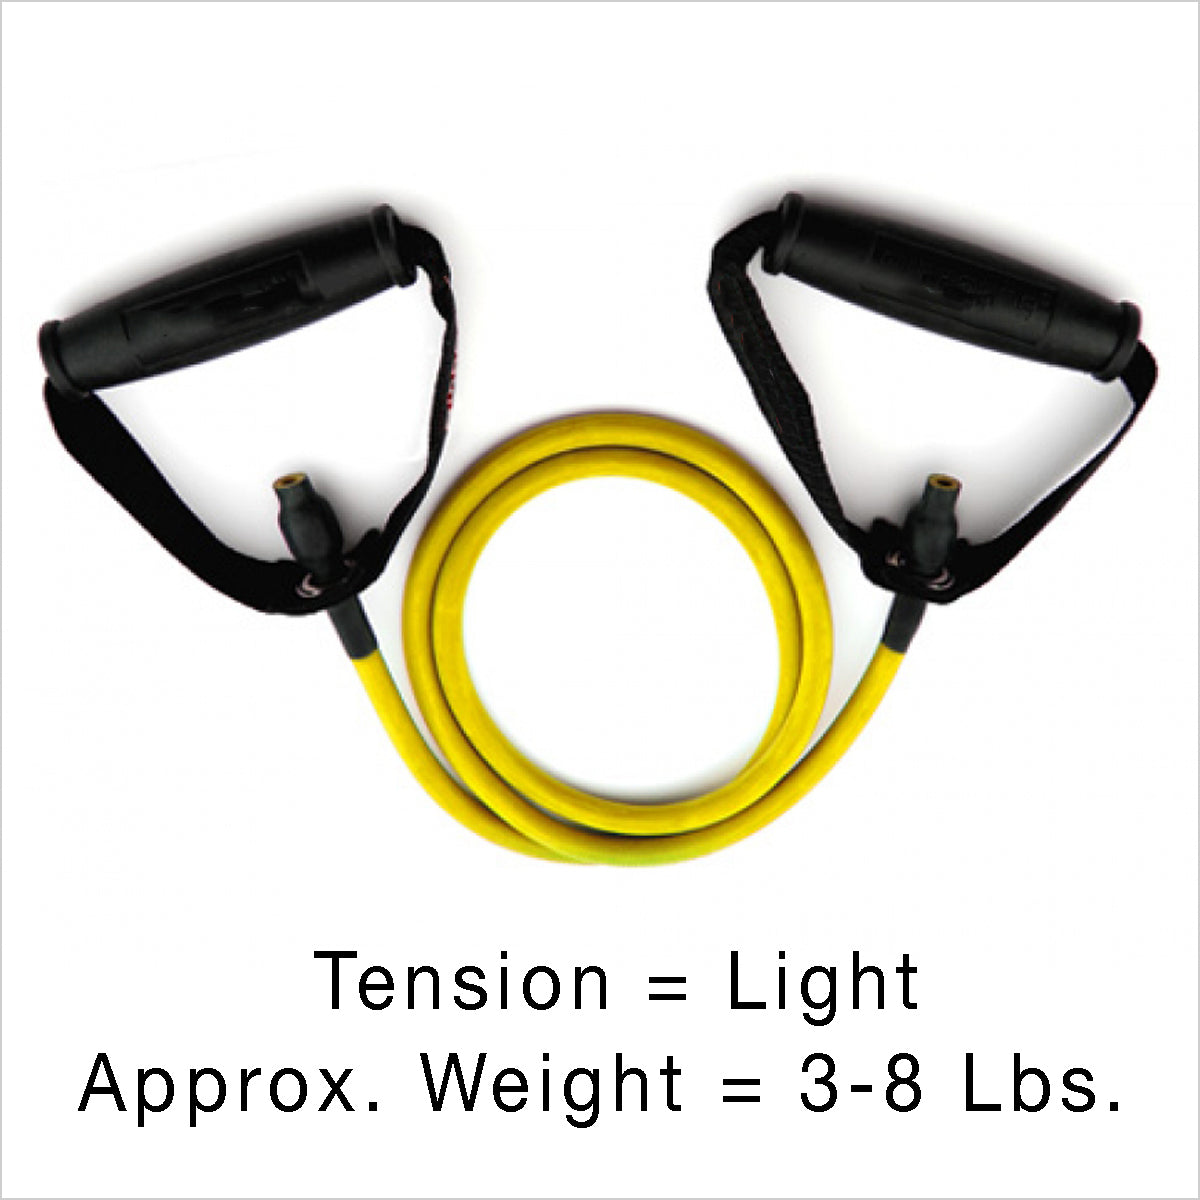 Powerbands Light-tension yellow band resistance bands by solostrength